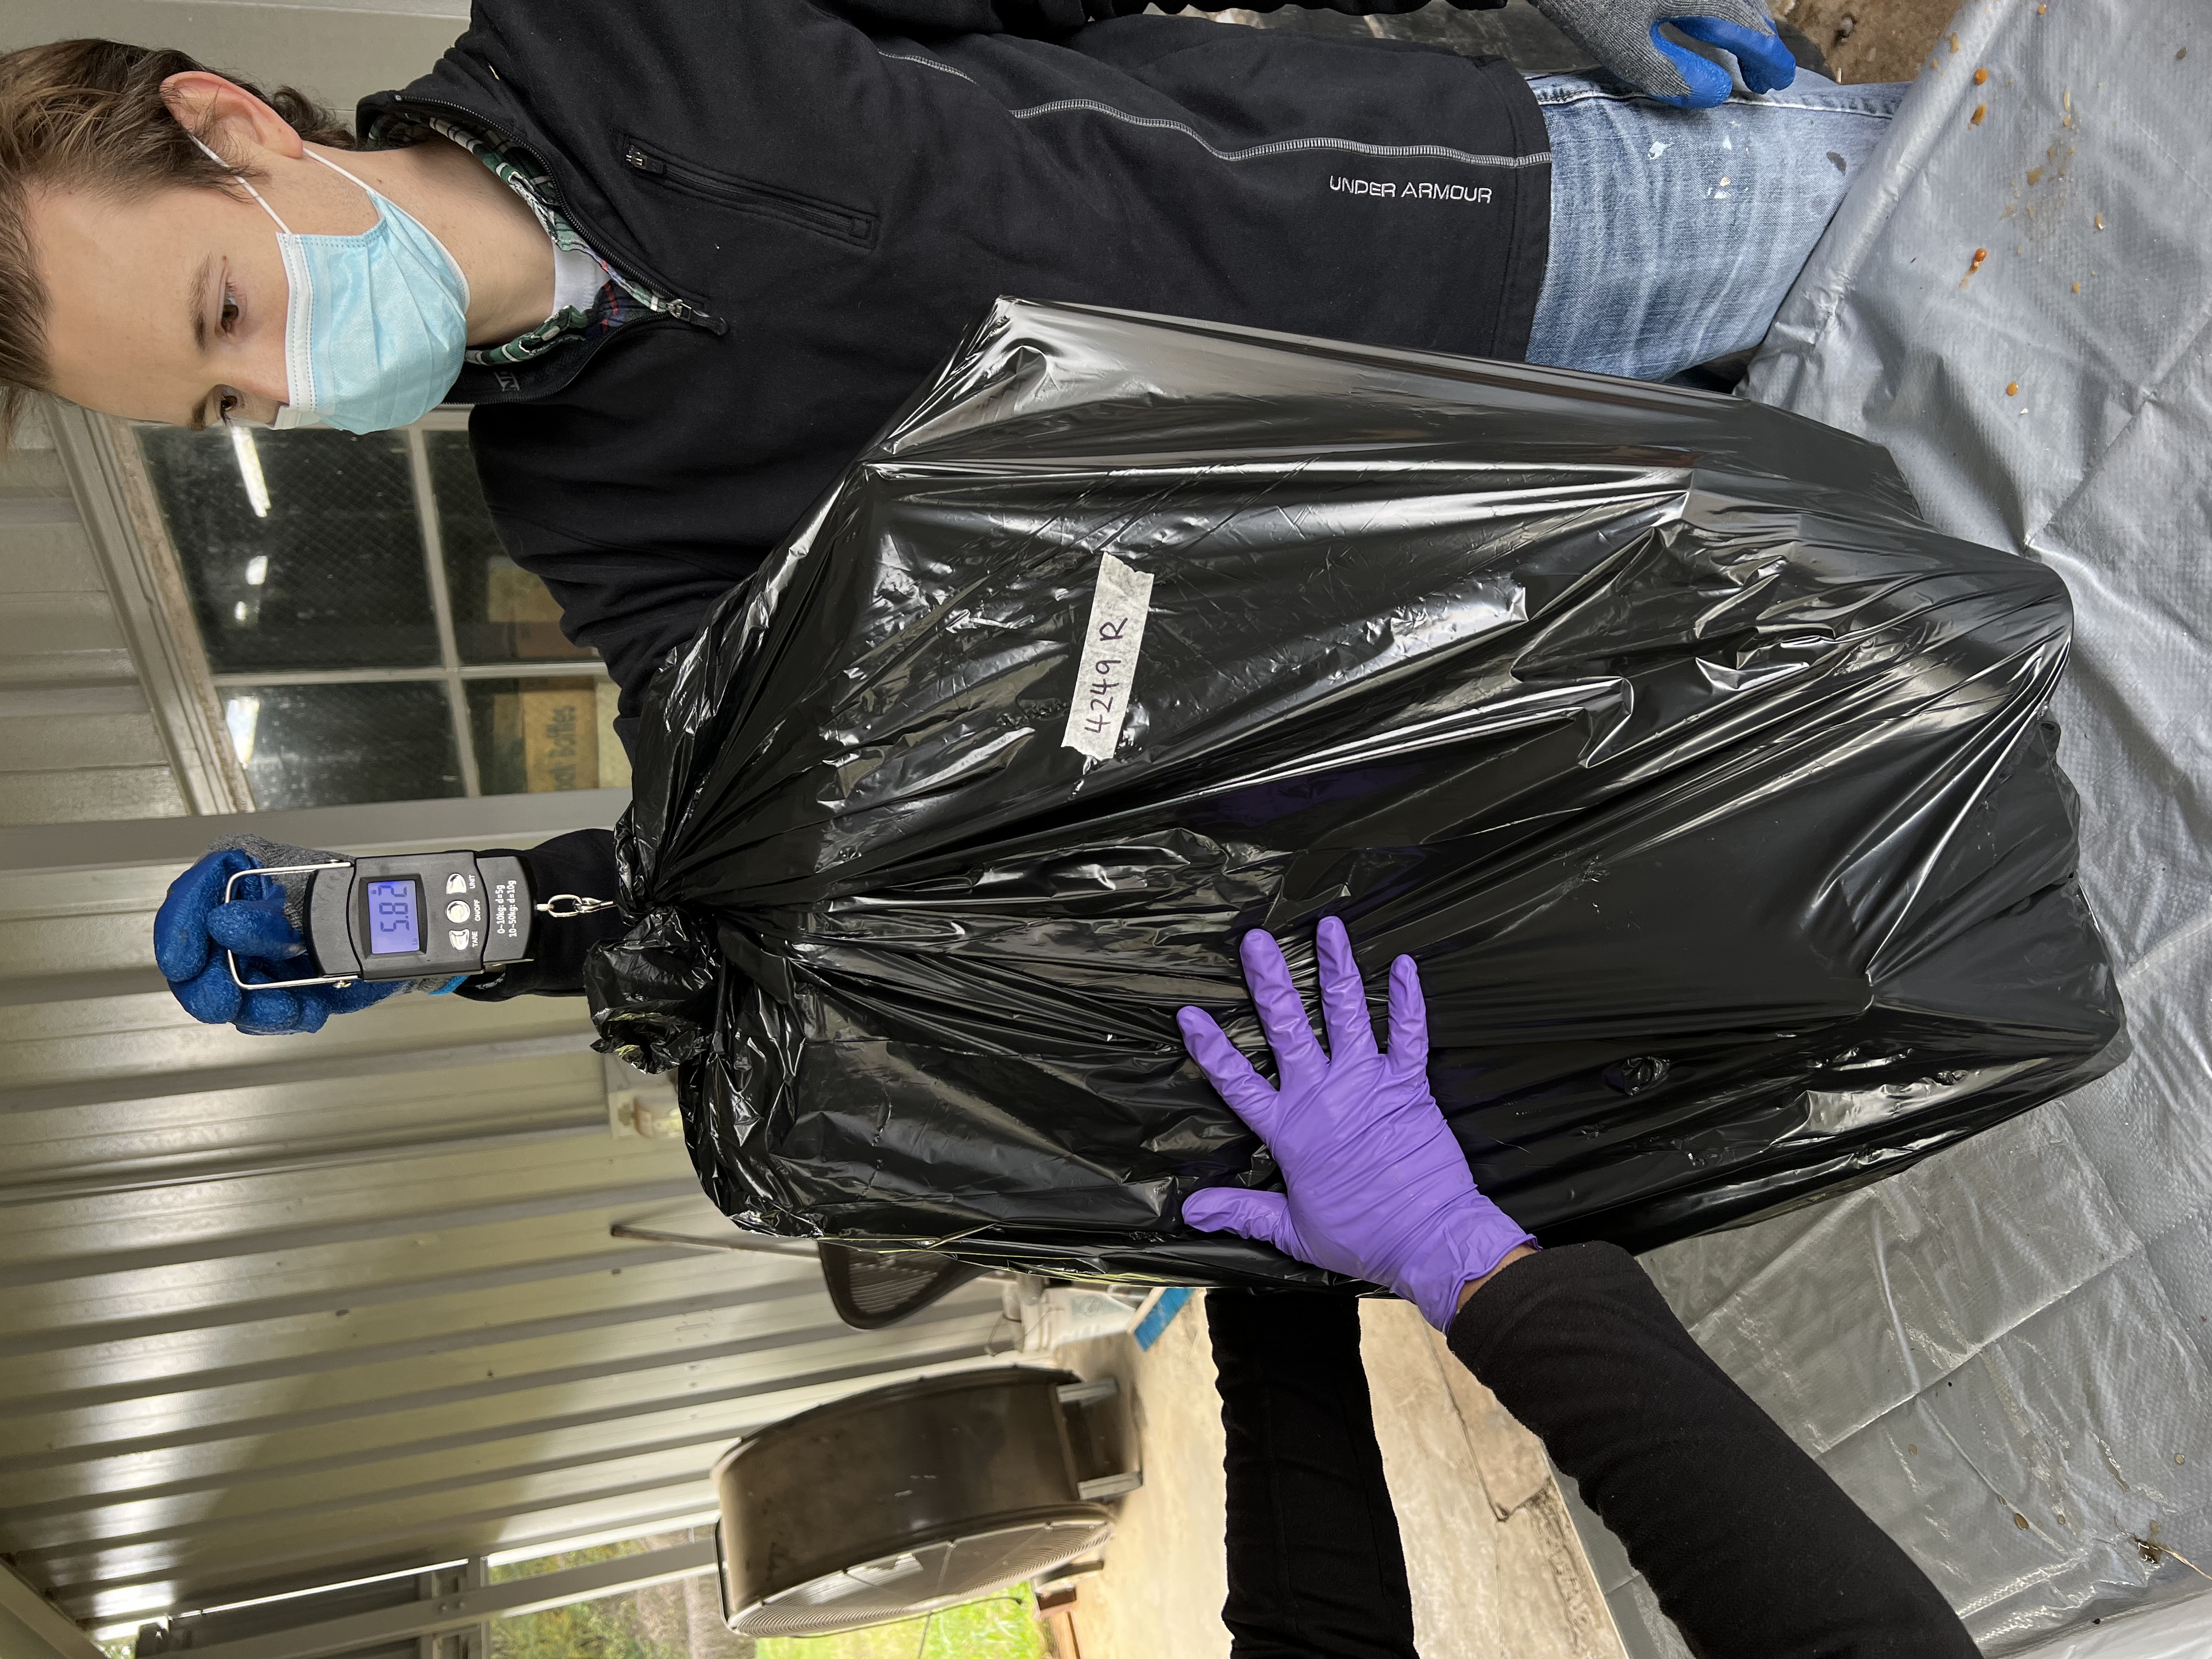 Patton weighing a bag of trash as a part of a waste audit